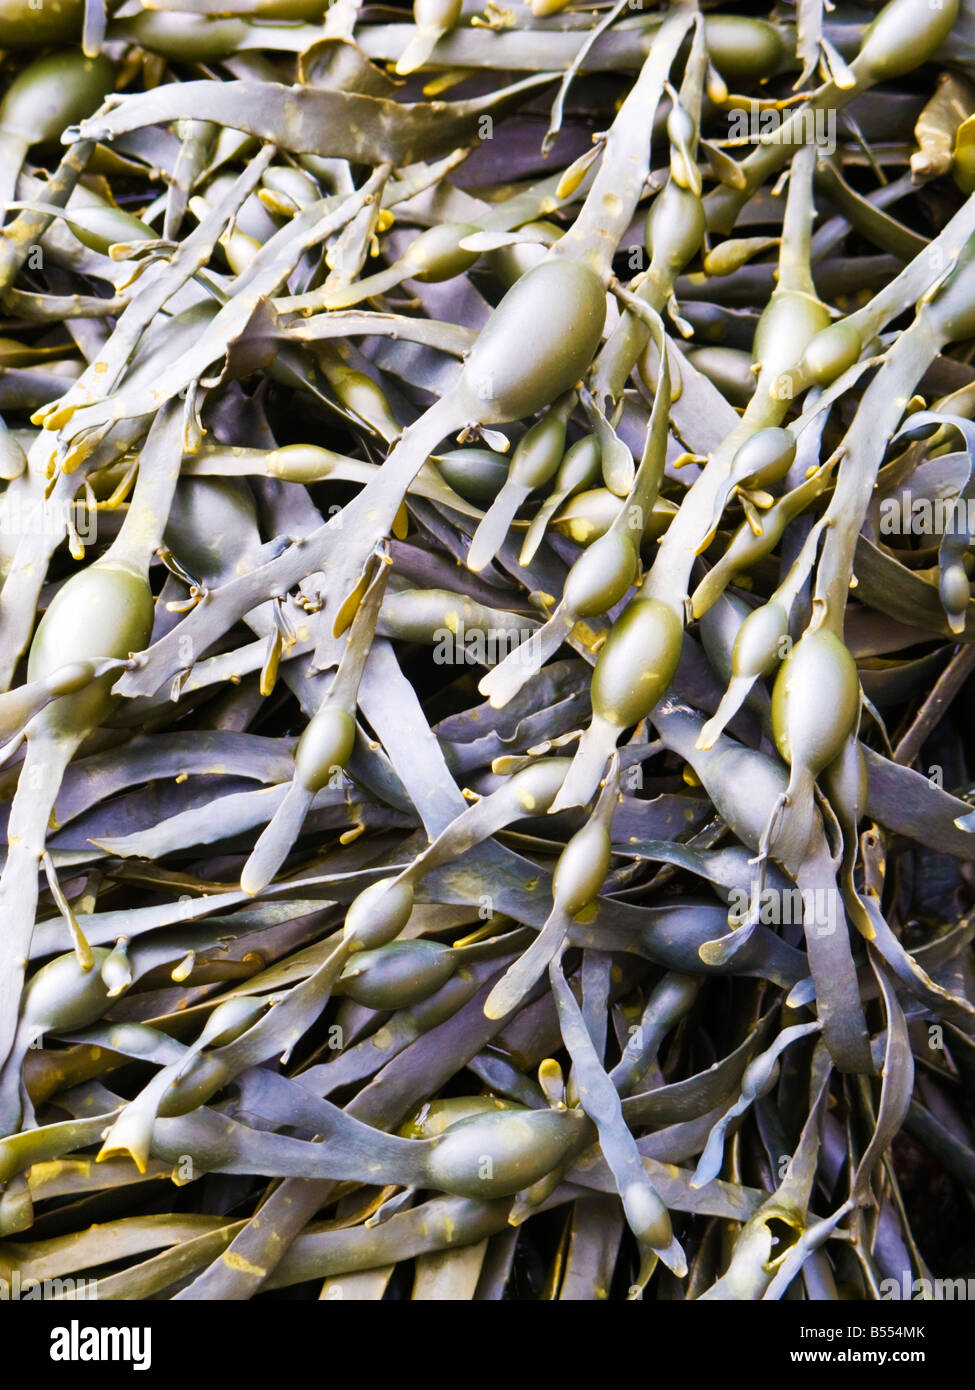 Colourful seaweed close up in France Europe Stock Photo